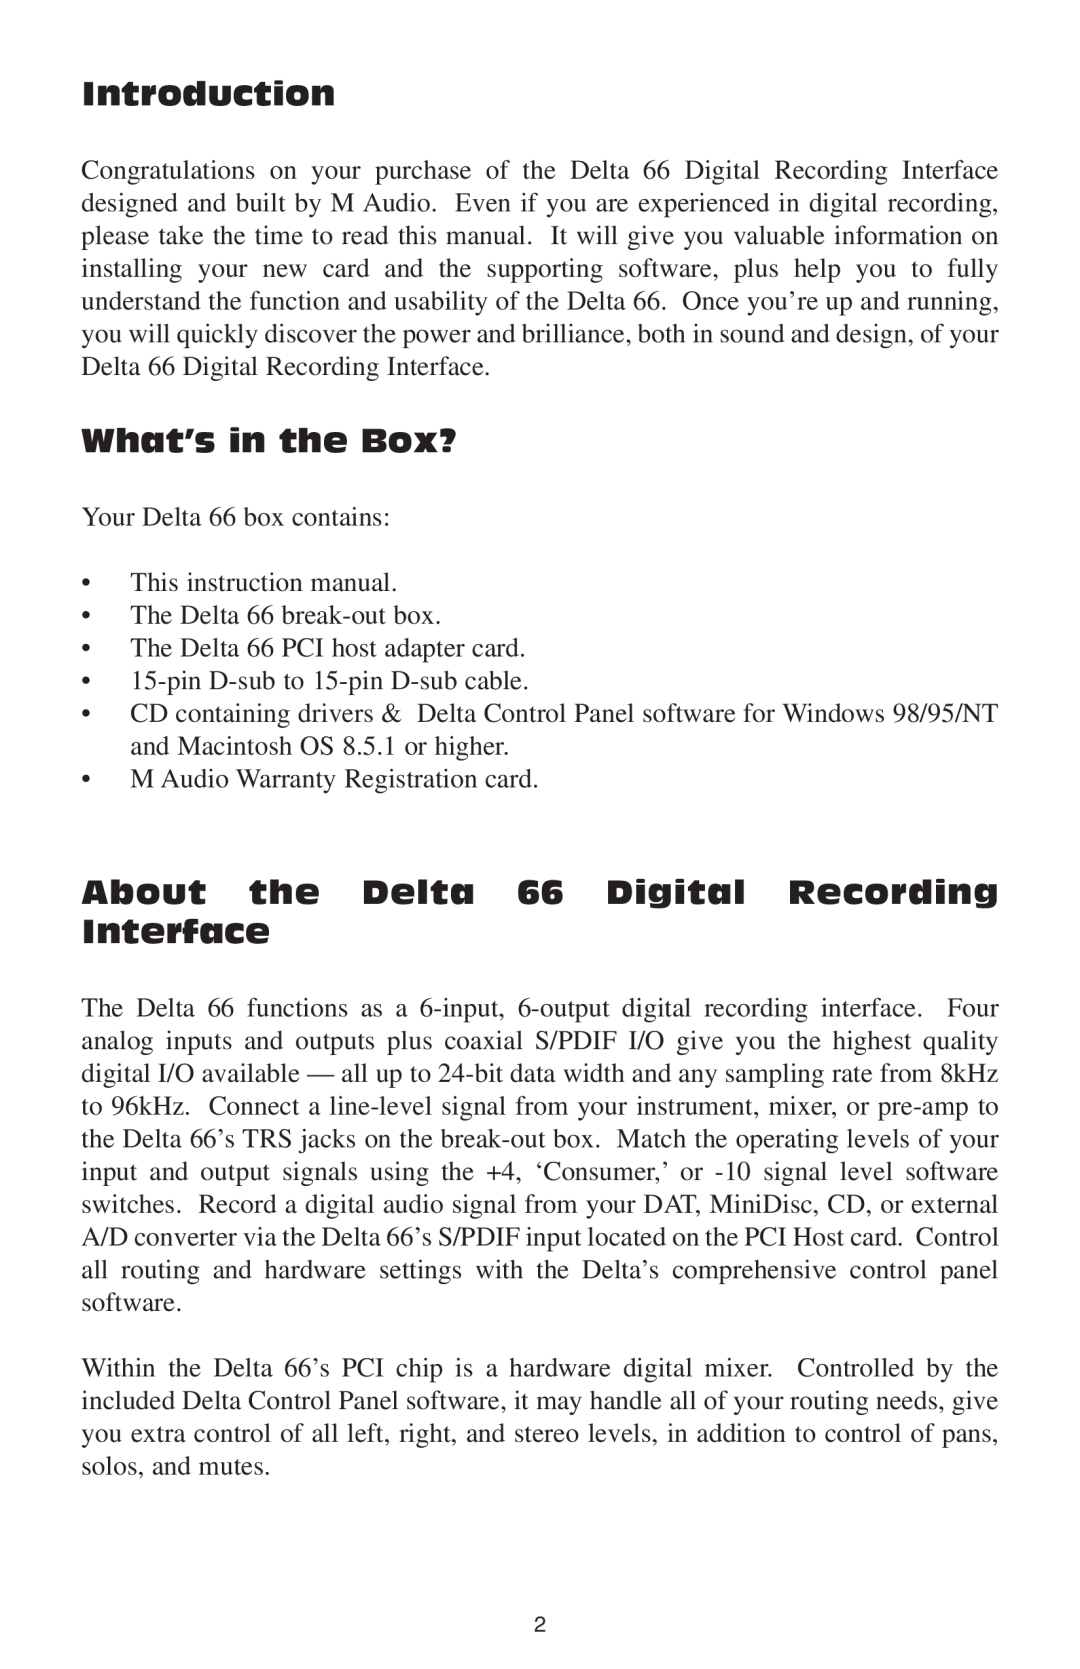 M-Audio manual Introduction, What’s in the Box?, About the Delta 66 Digital Recording Interface 